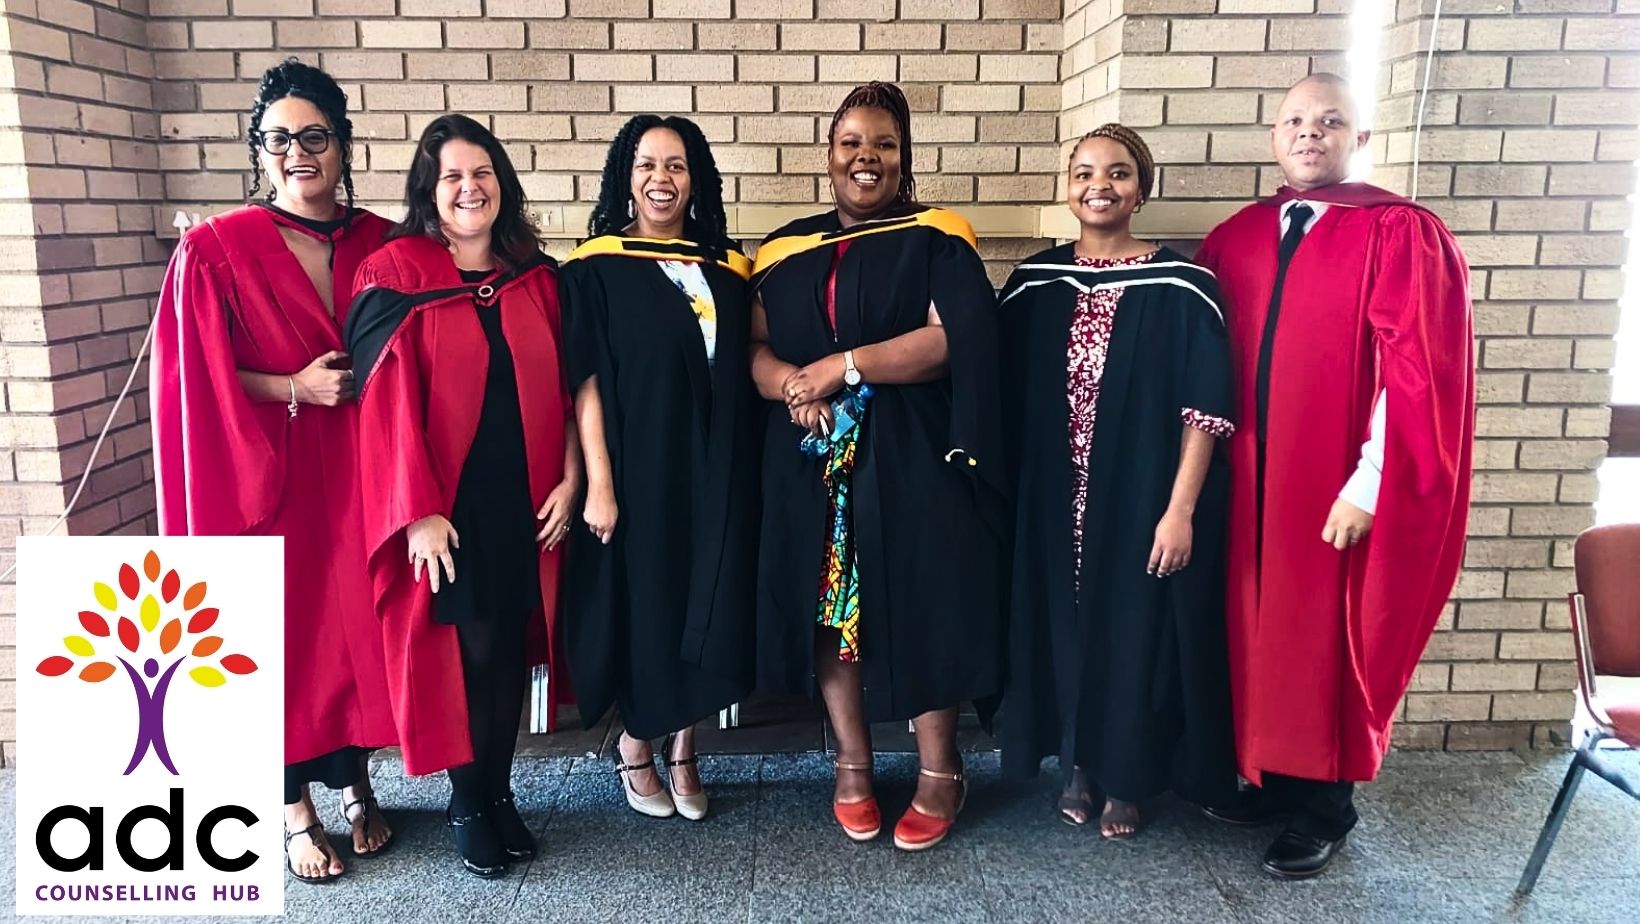 The ADC Counselling Hub represented by Prof Megan Campbell, Nqobile Msomi, Dr Duane Booysen, Christine Lewis and Mandisa Ndabula, proudly received their well-deserved award at the 2023 Graduation Ceremony on Thursday, 30 March 